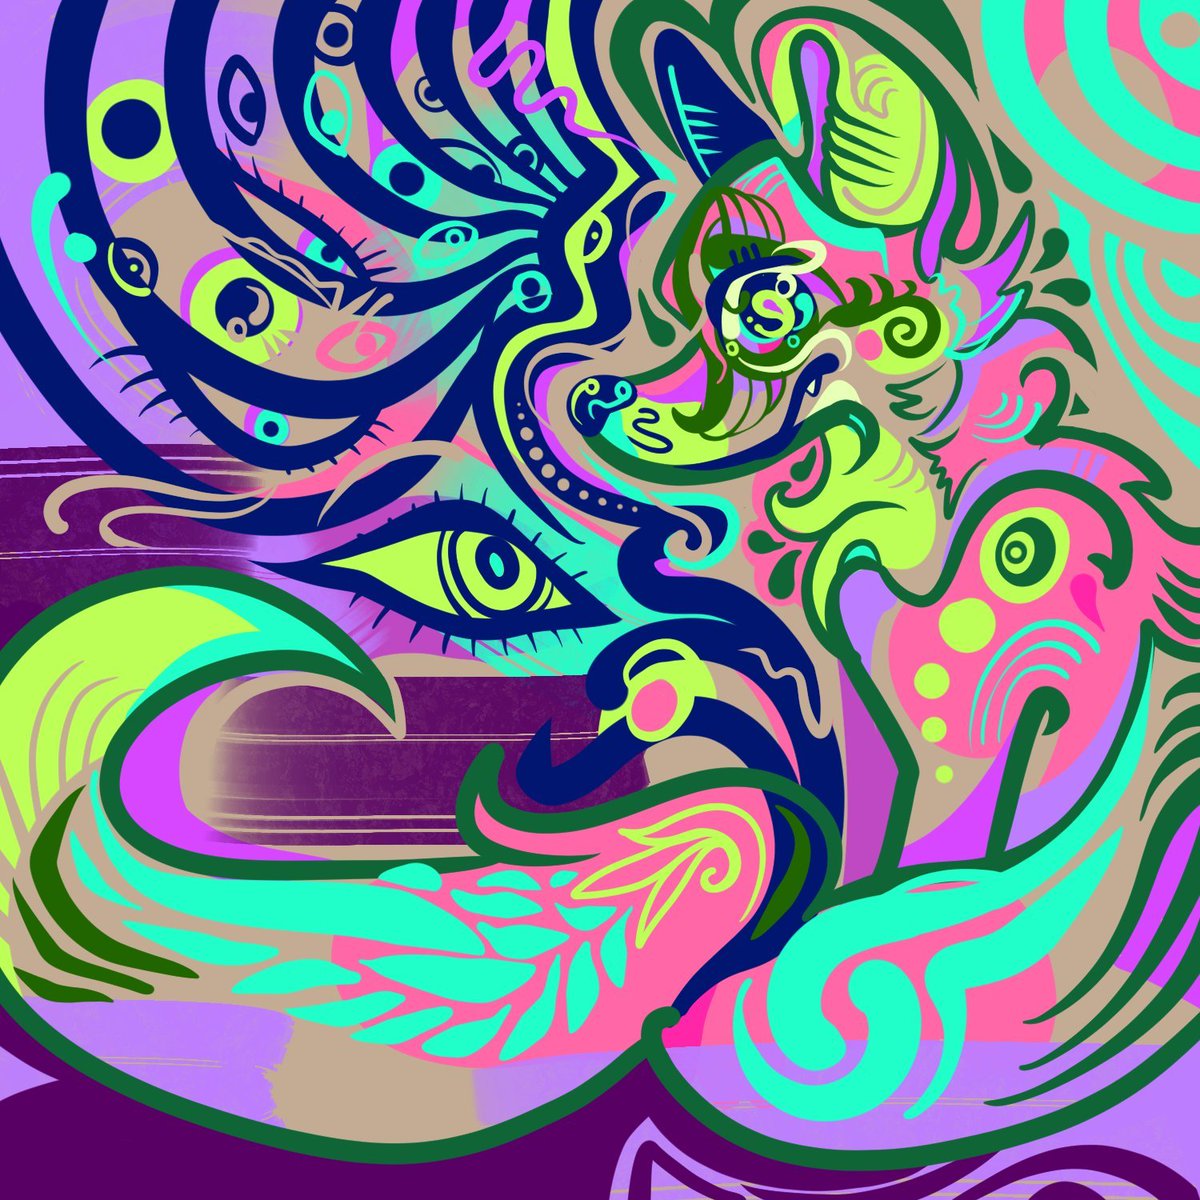 I wanna do another thread like this, so...Furry artists with abstract/surreal/experimental/psychedelic art styles (even if it's not your main style), share your works below!!! Here are some of mine